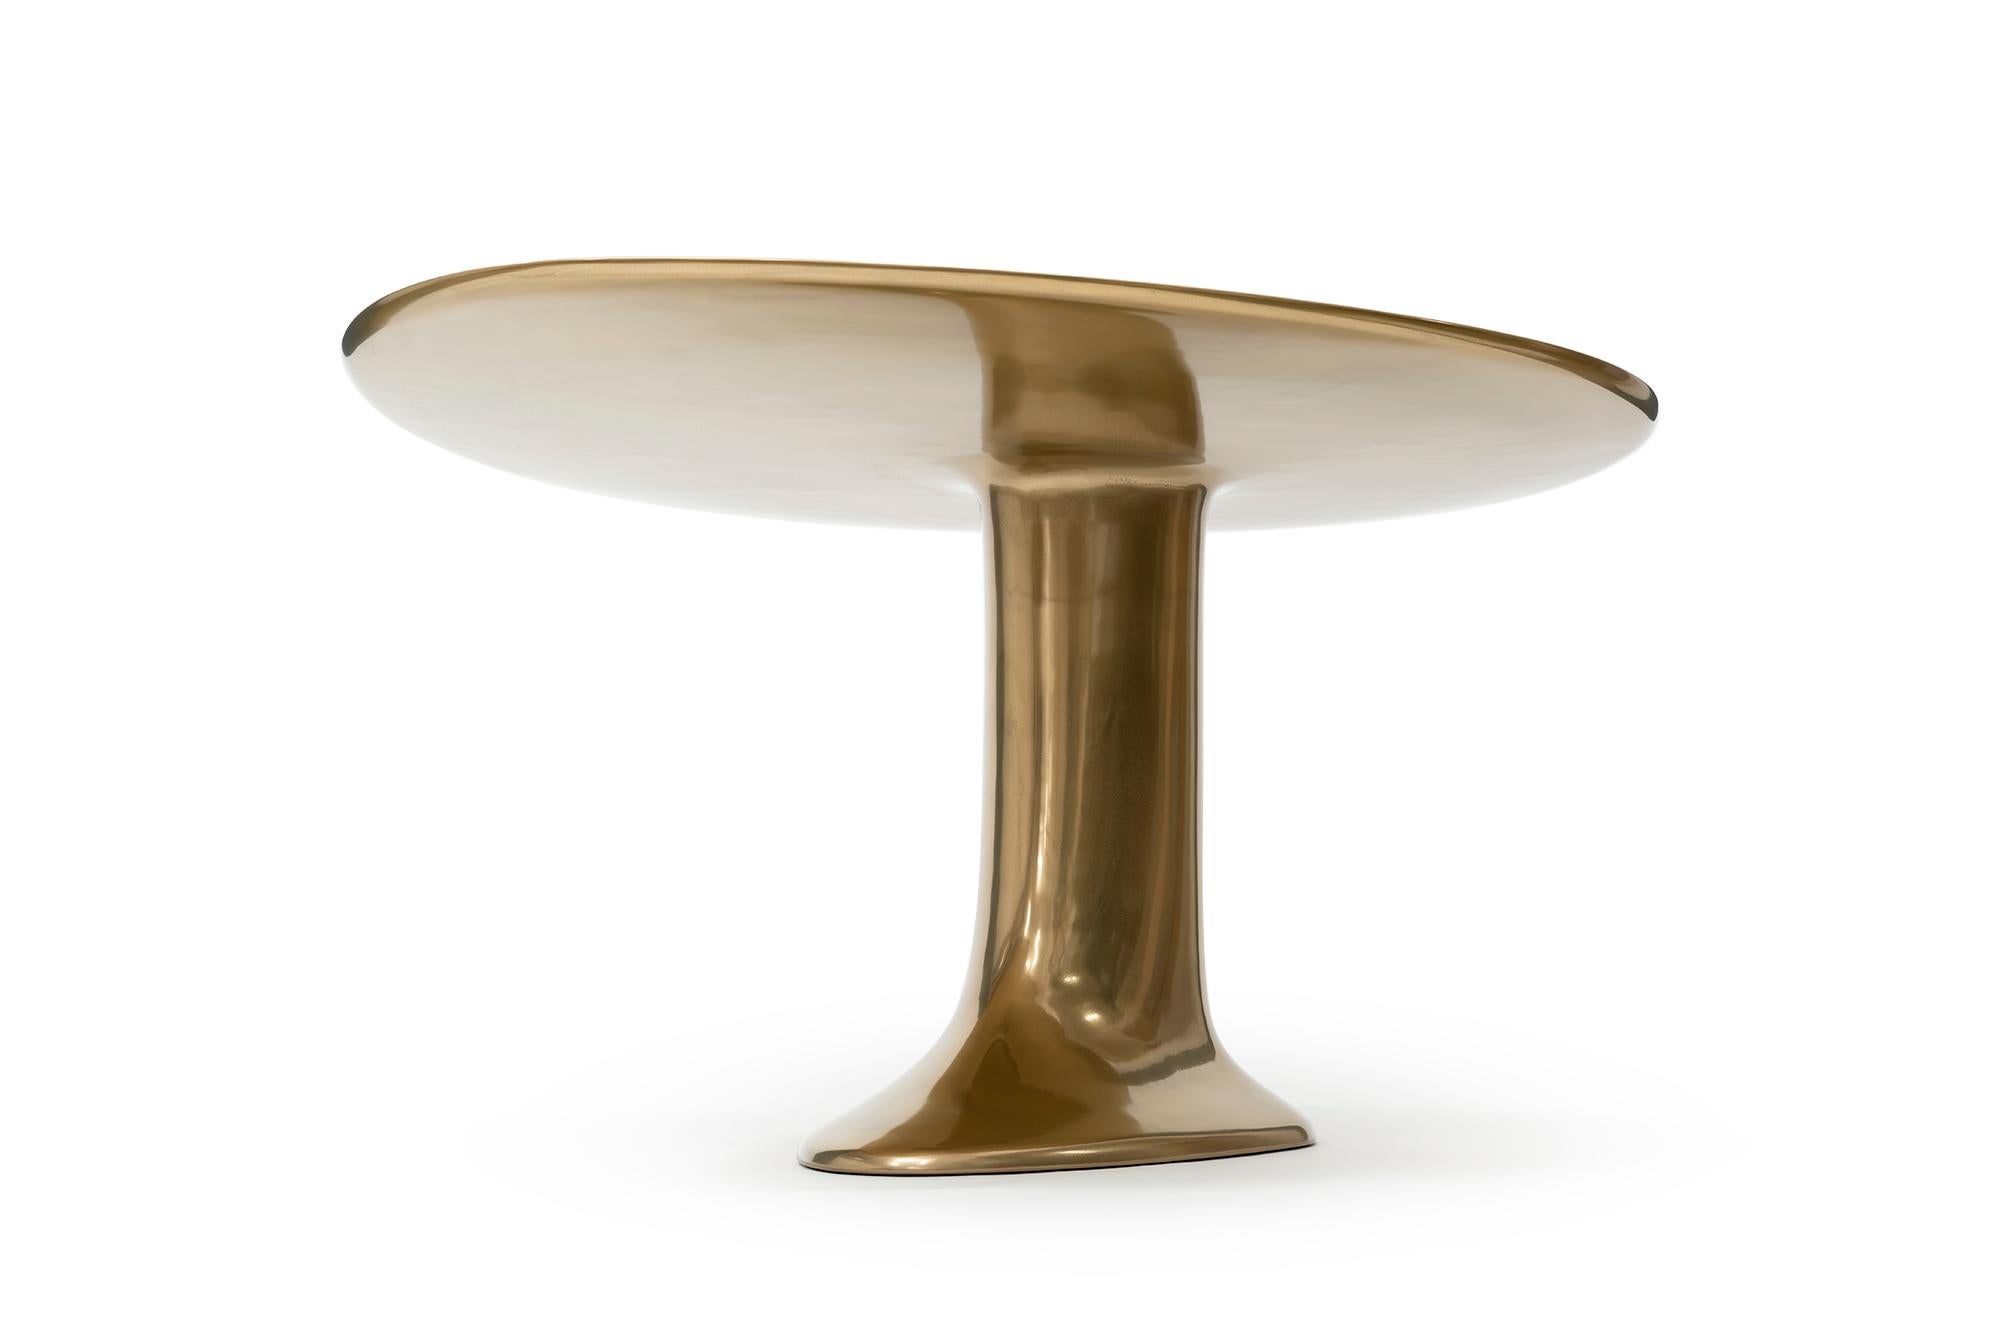 Modern Messier 104, 21st Century Sculptured Oval Bronzed Dining Table For Sale